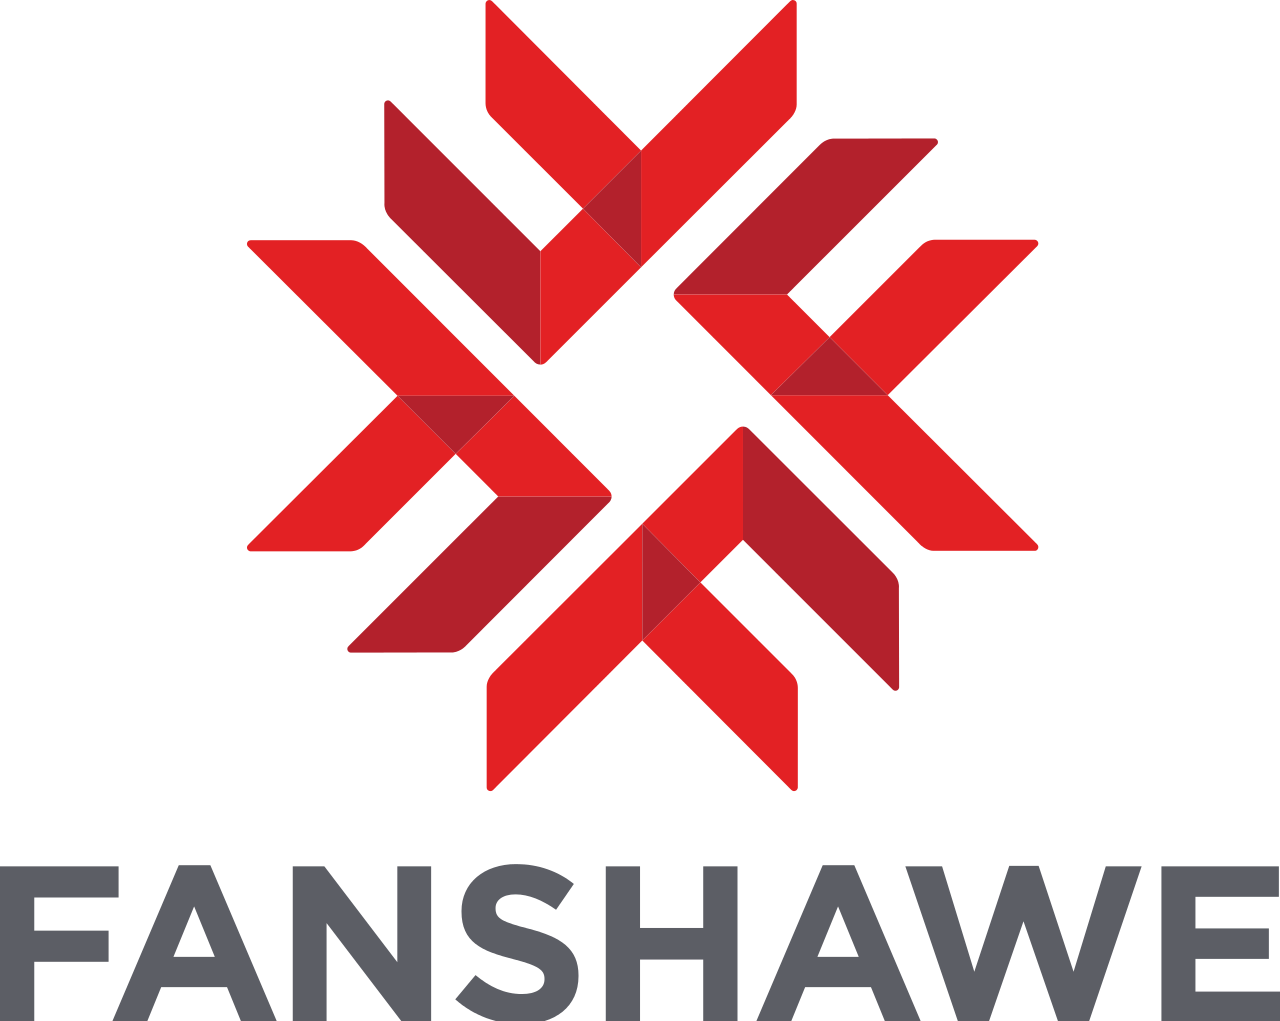 The Event Will Allow You To Learn More About Early - Fanshawe College (1280x1021)